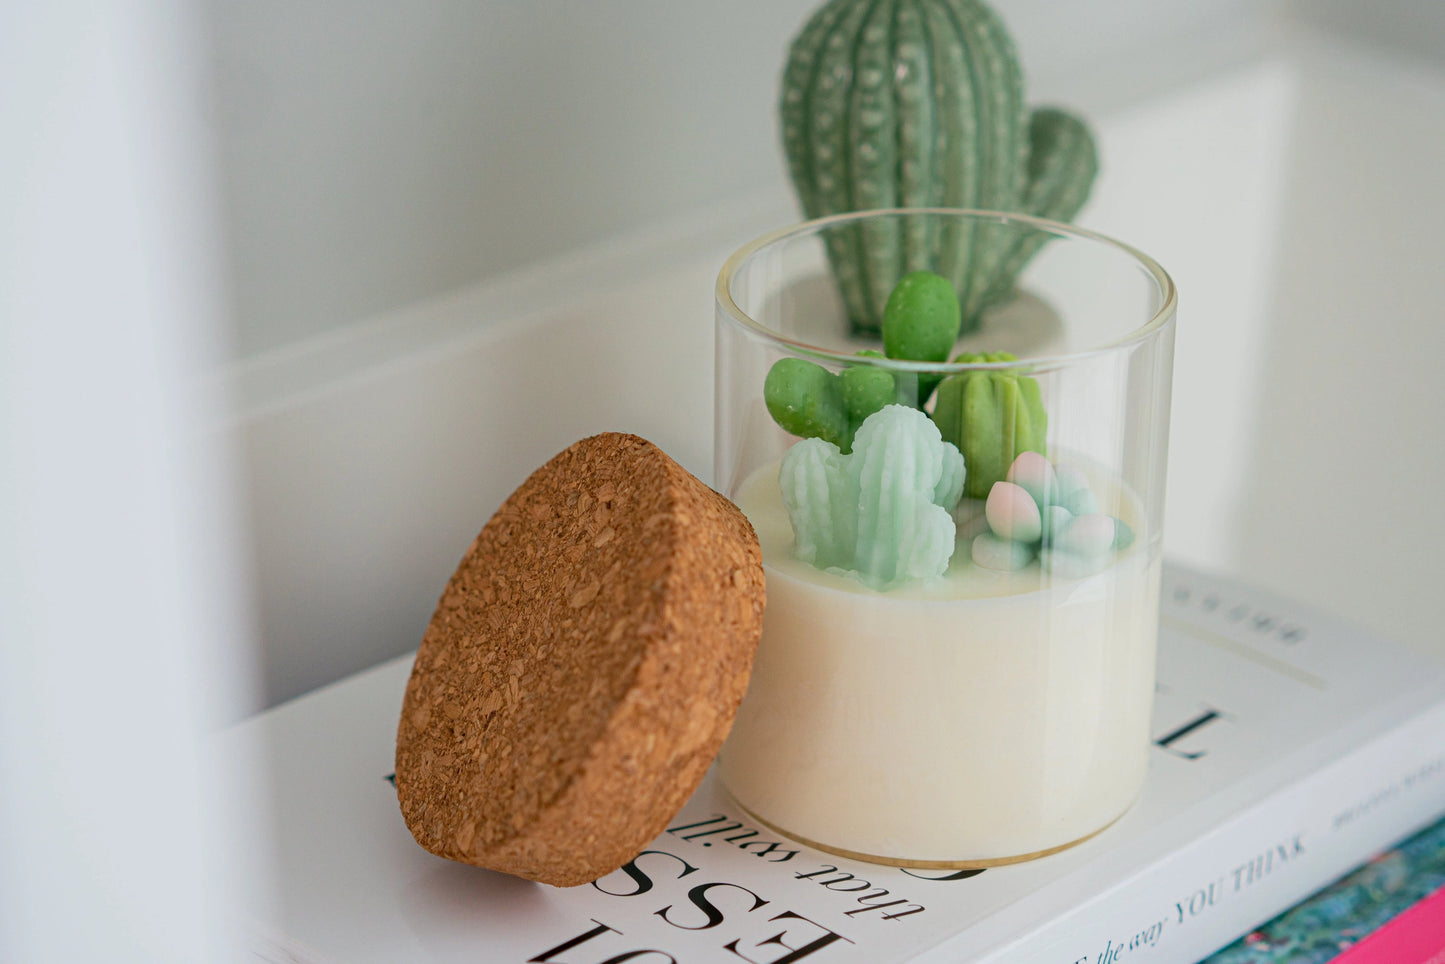 Bunny Ear Cactus Candle, Soy Blend Candle